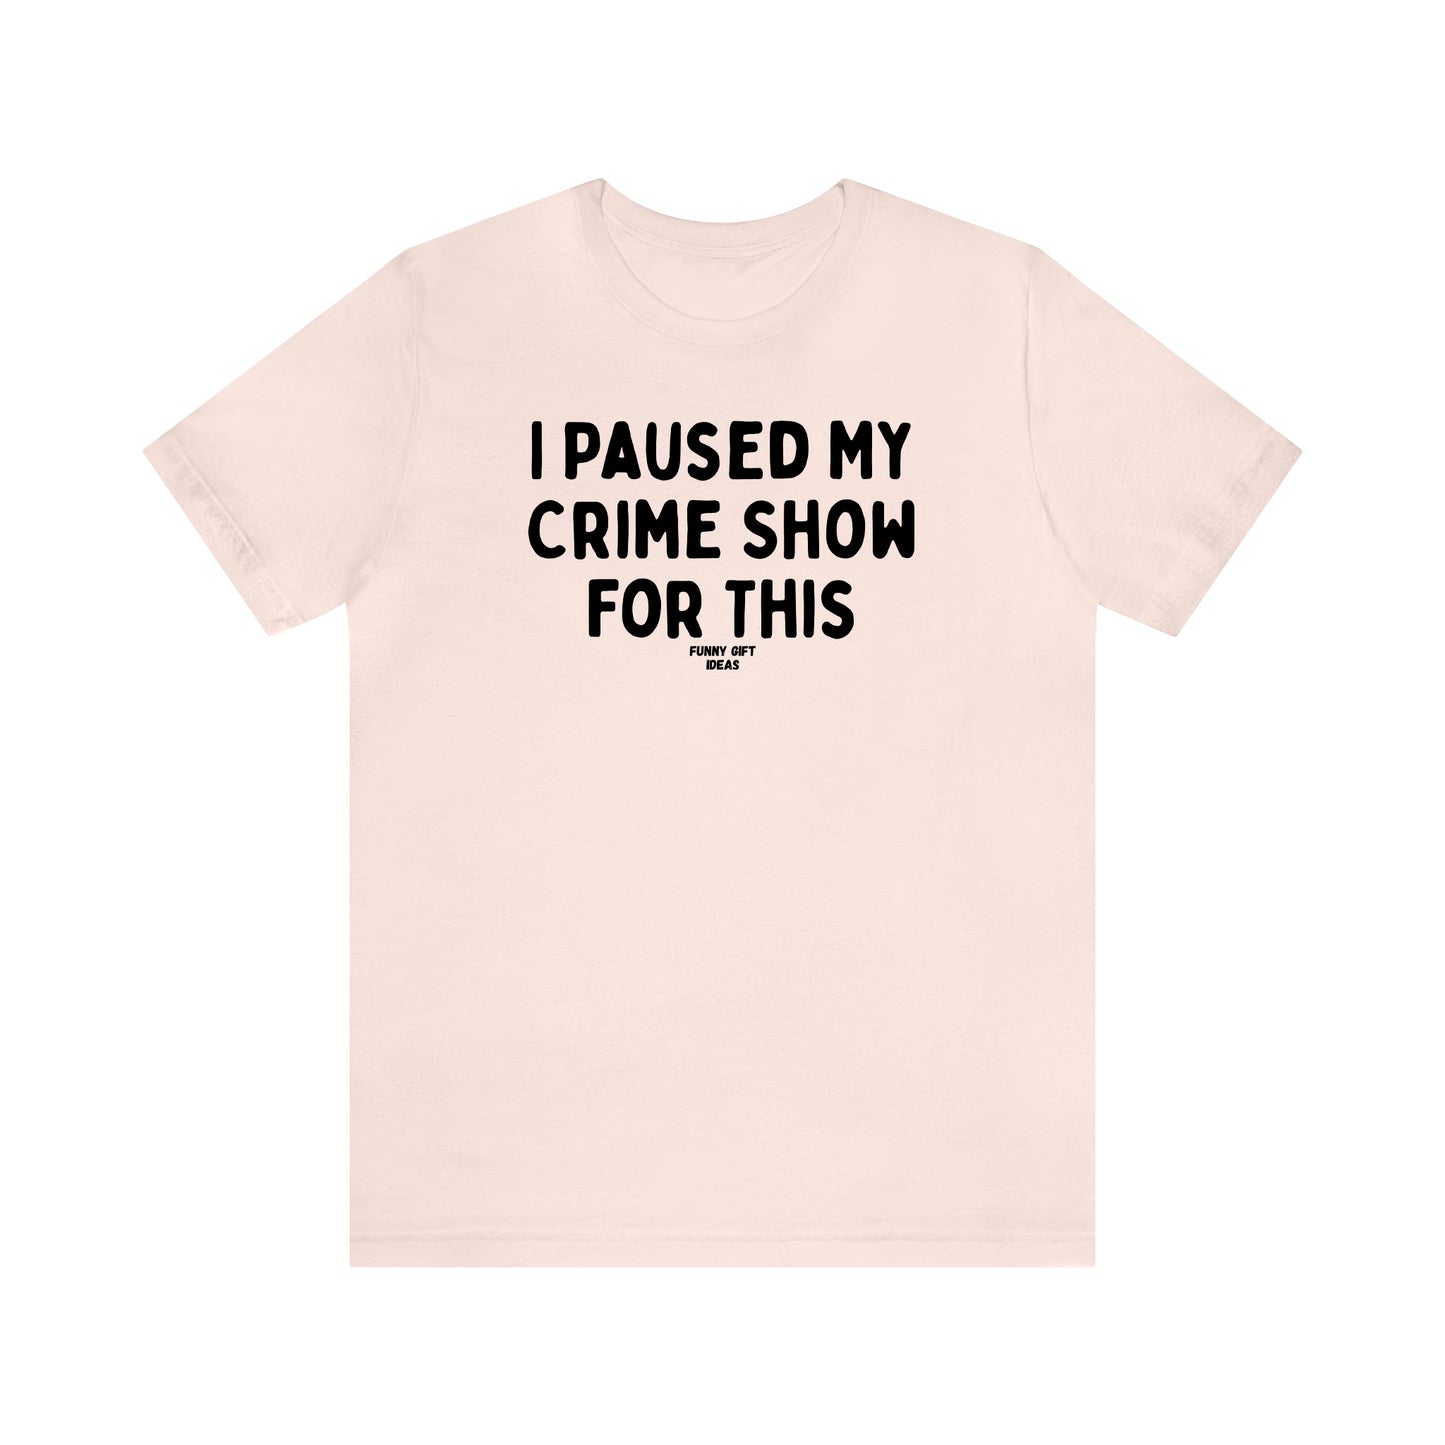 Funny Shirts for Women - I Paused My Crime Show for This - Women's T Shirts